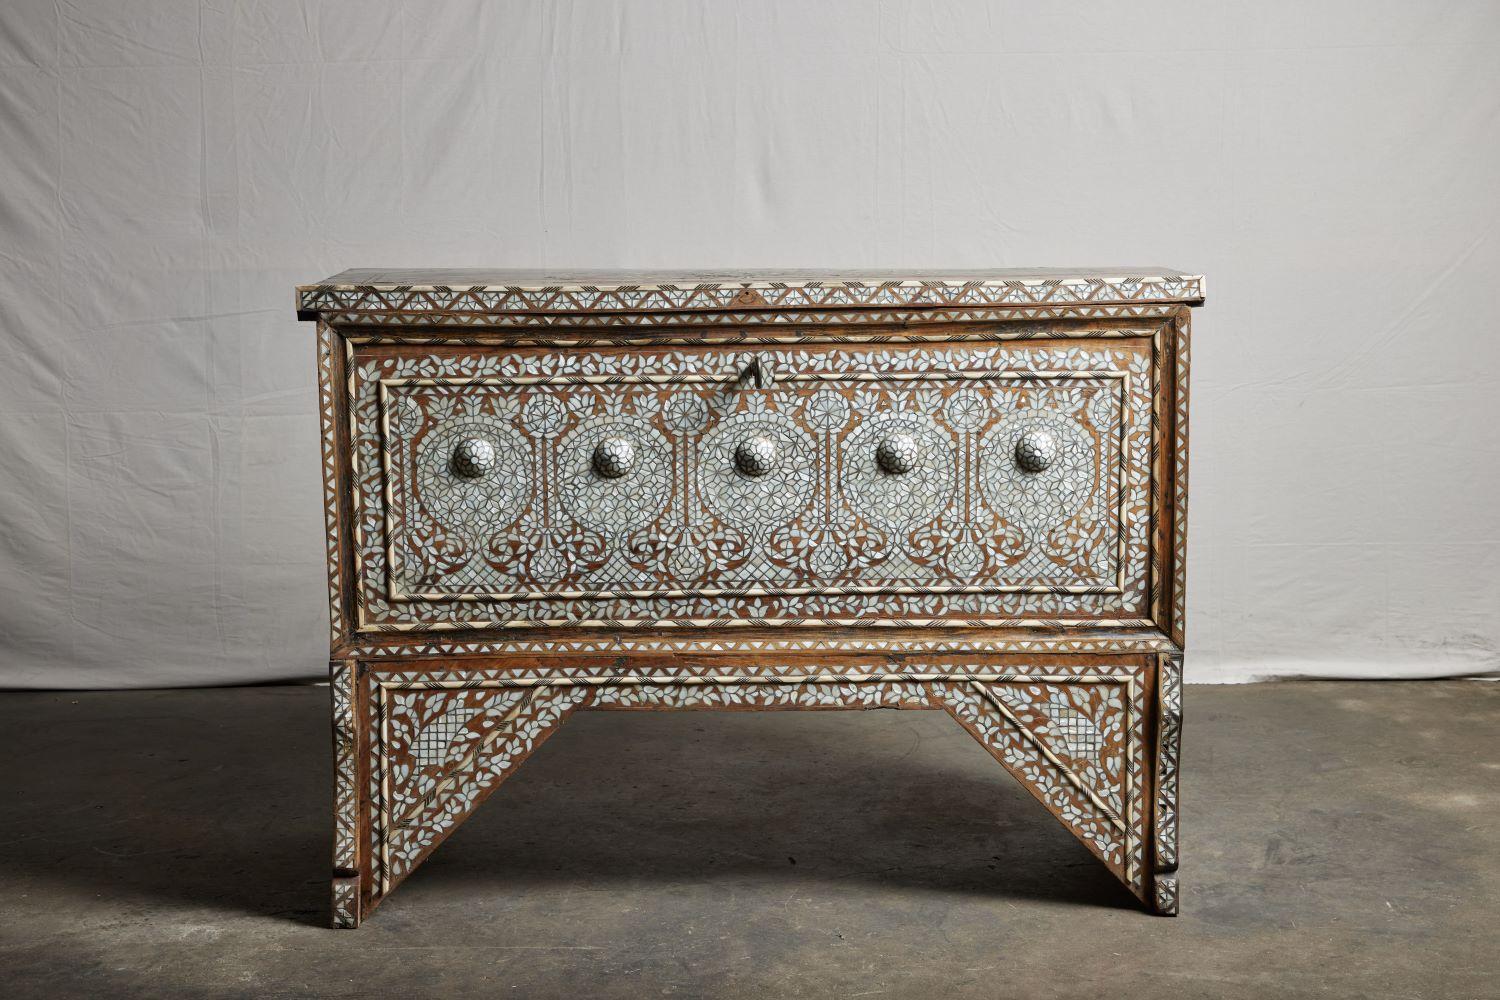 A heavily inlaid Syrian wedding chest with key. Lighter-toned blonde wood on a lovely stand. Syrian dowry wedding chest showcasing very fine intricate mother-of-pearl inlay.